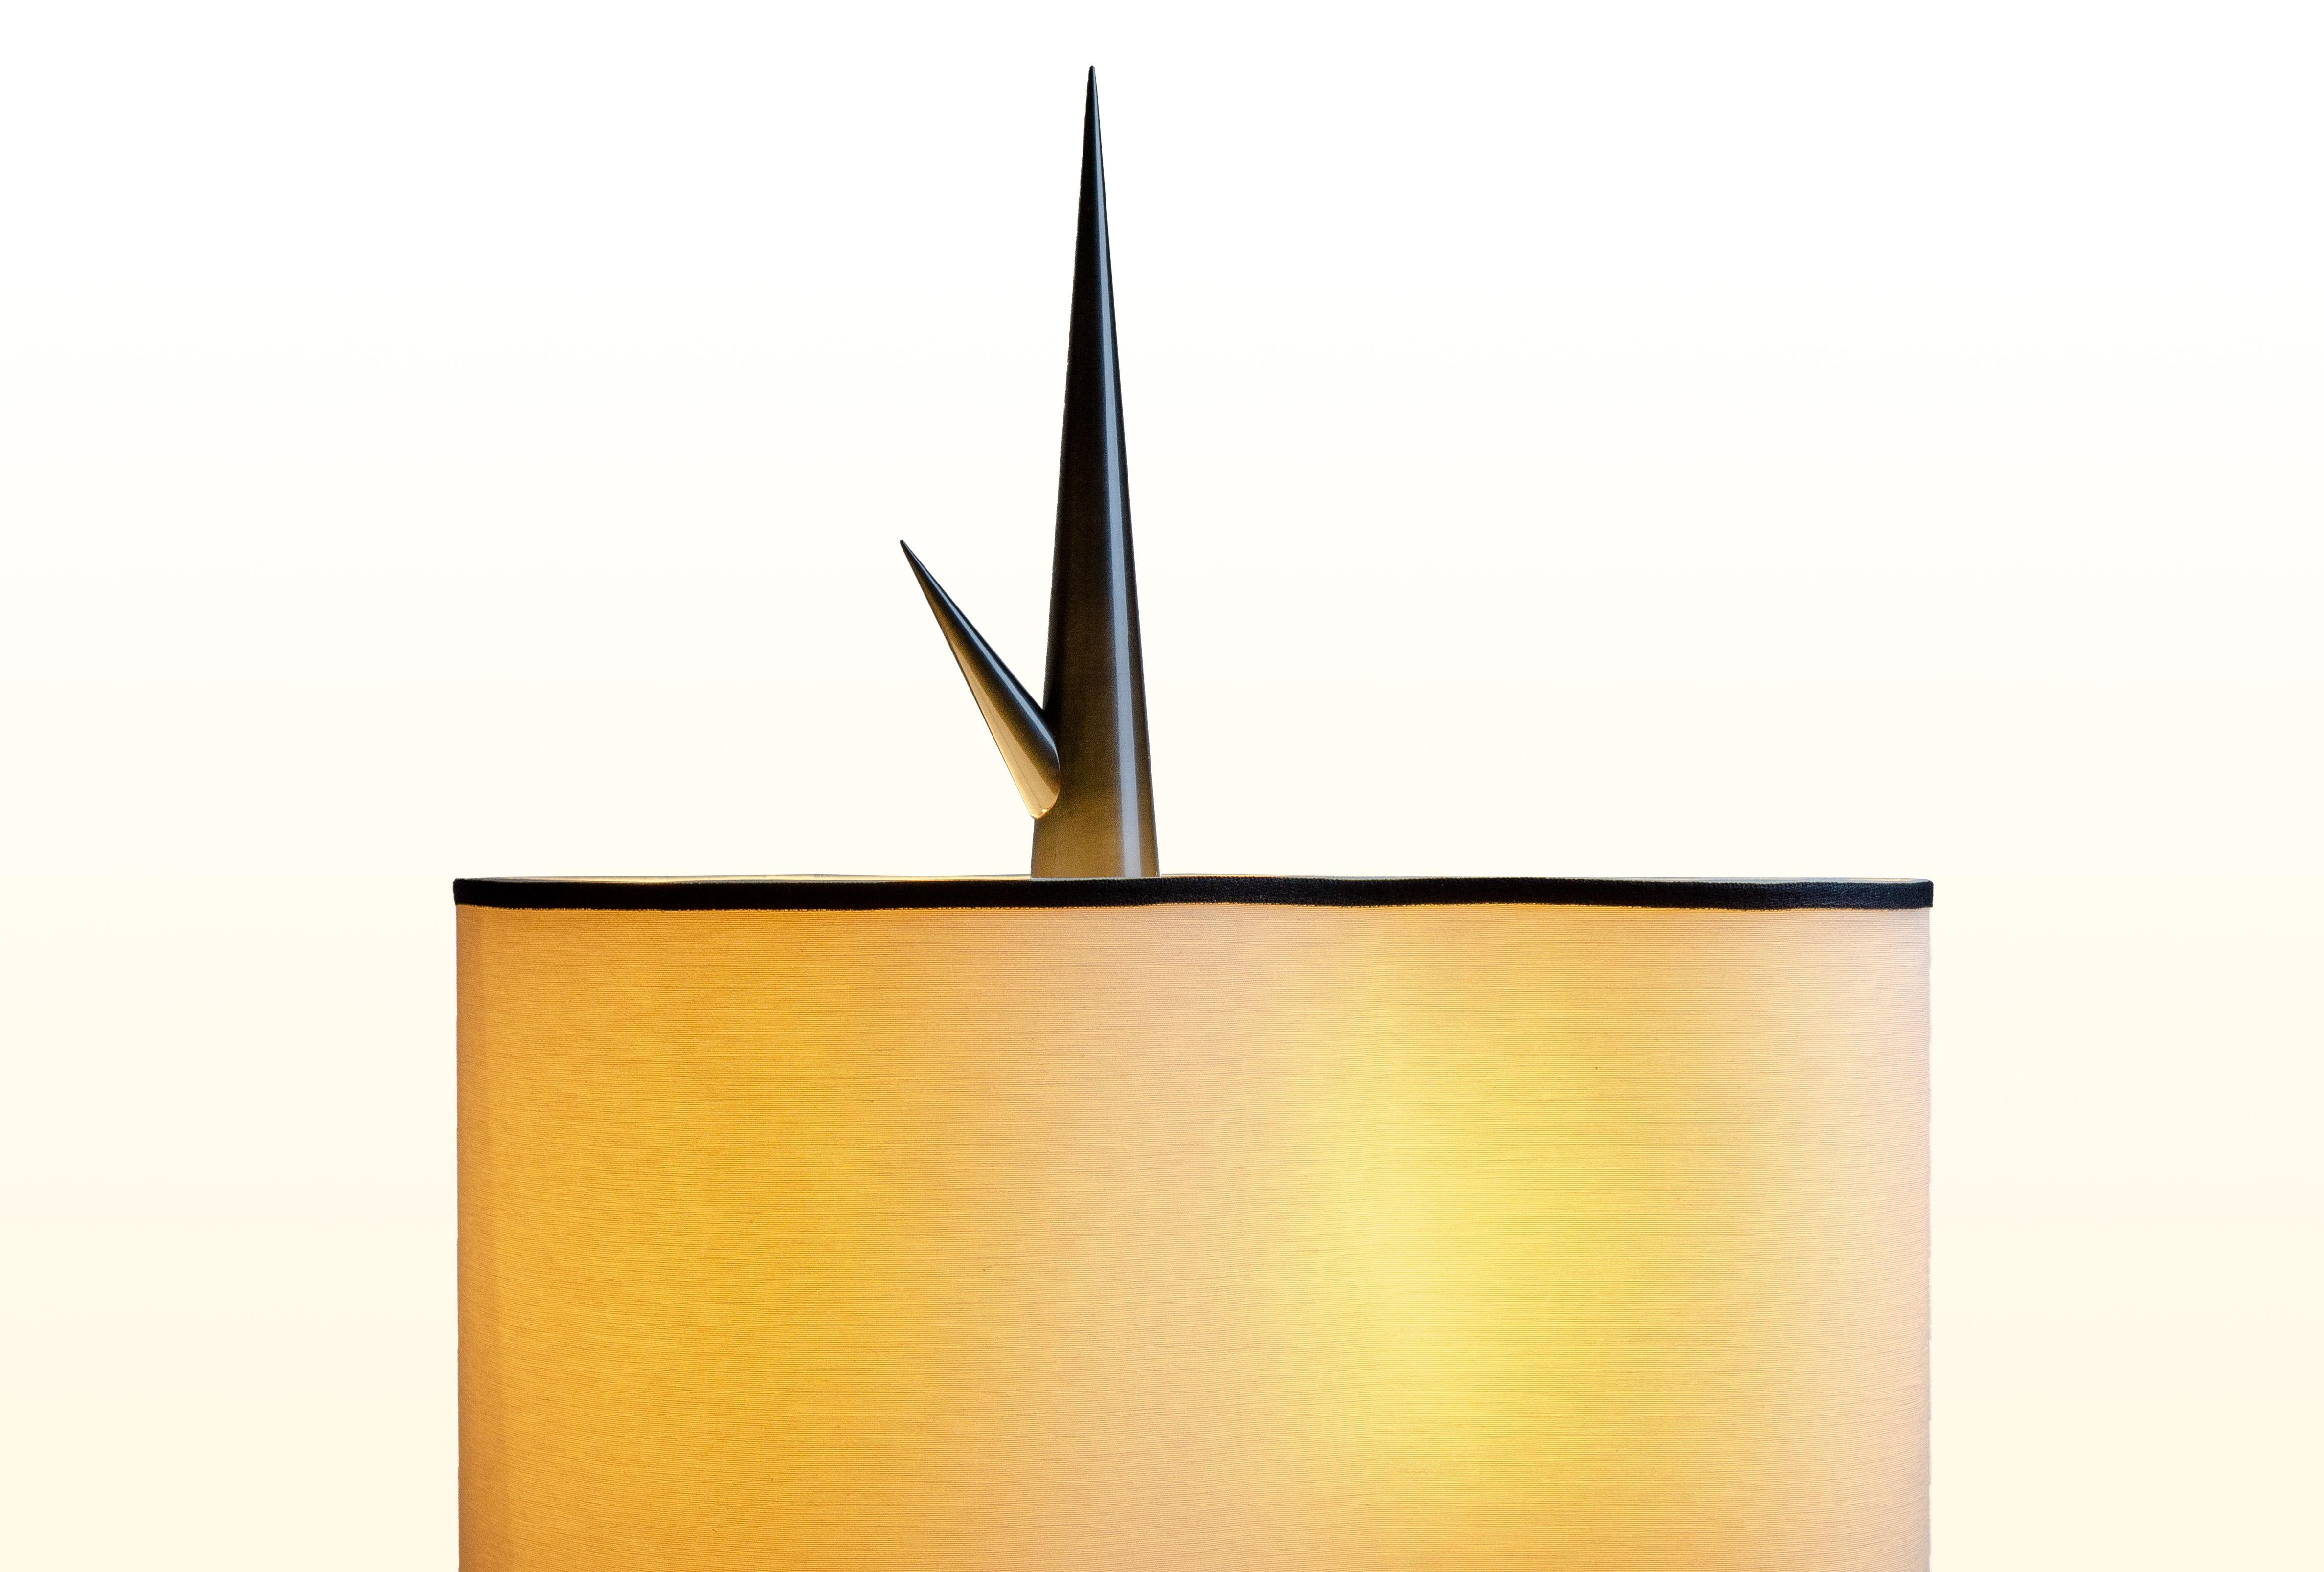 Achille Salvagni
Sting wood
2019

This table lamp has a nearly perfect conical shape for it's base and culminates at its top in a needle-sharp point. The lamp base is made of wood with a brass finial and an organic silk lampshade and feather